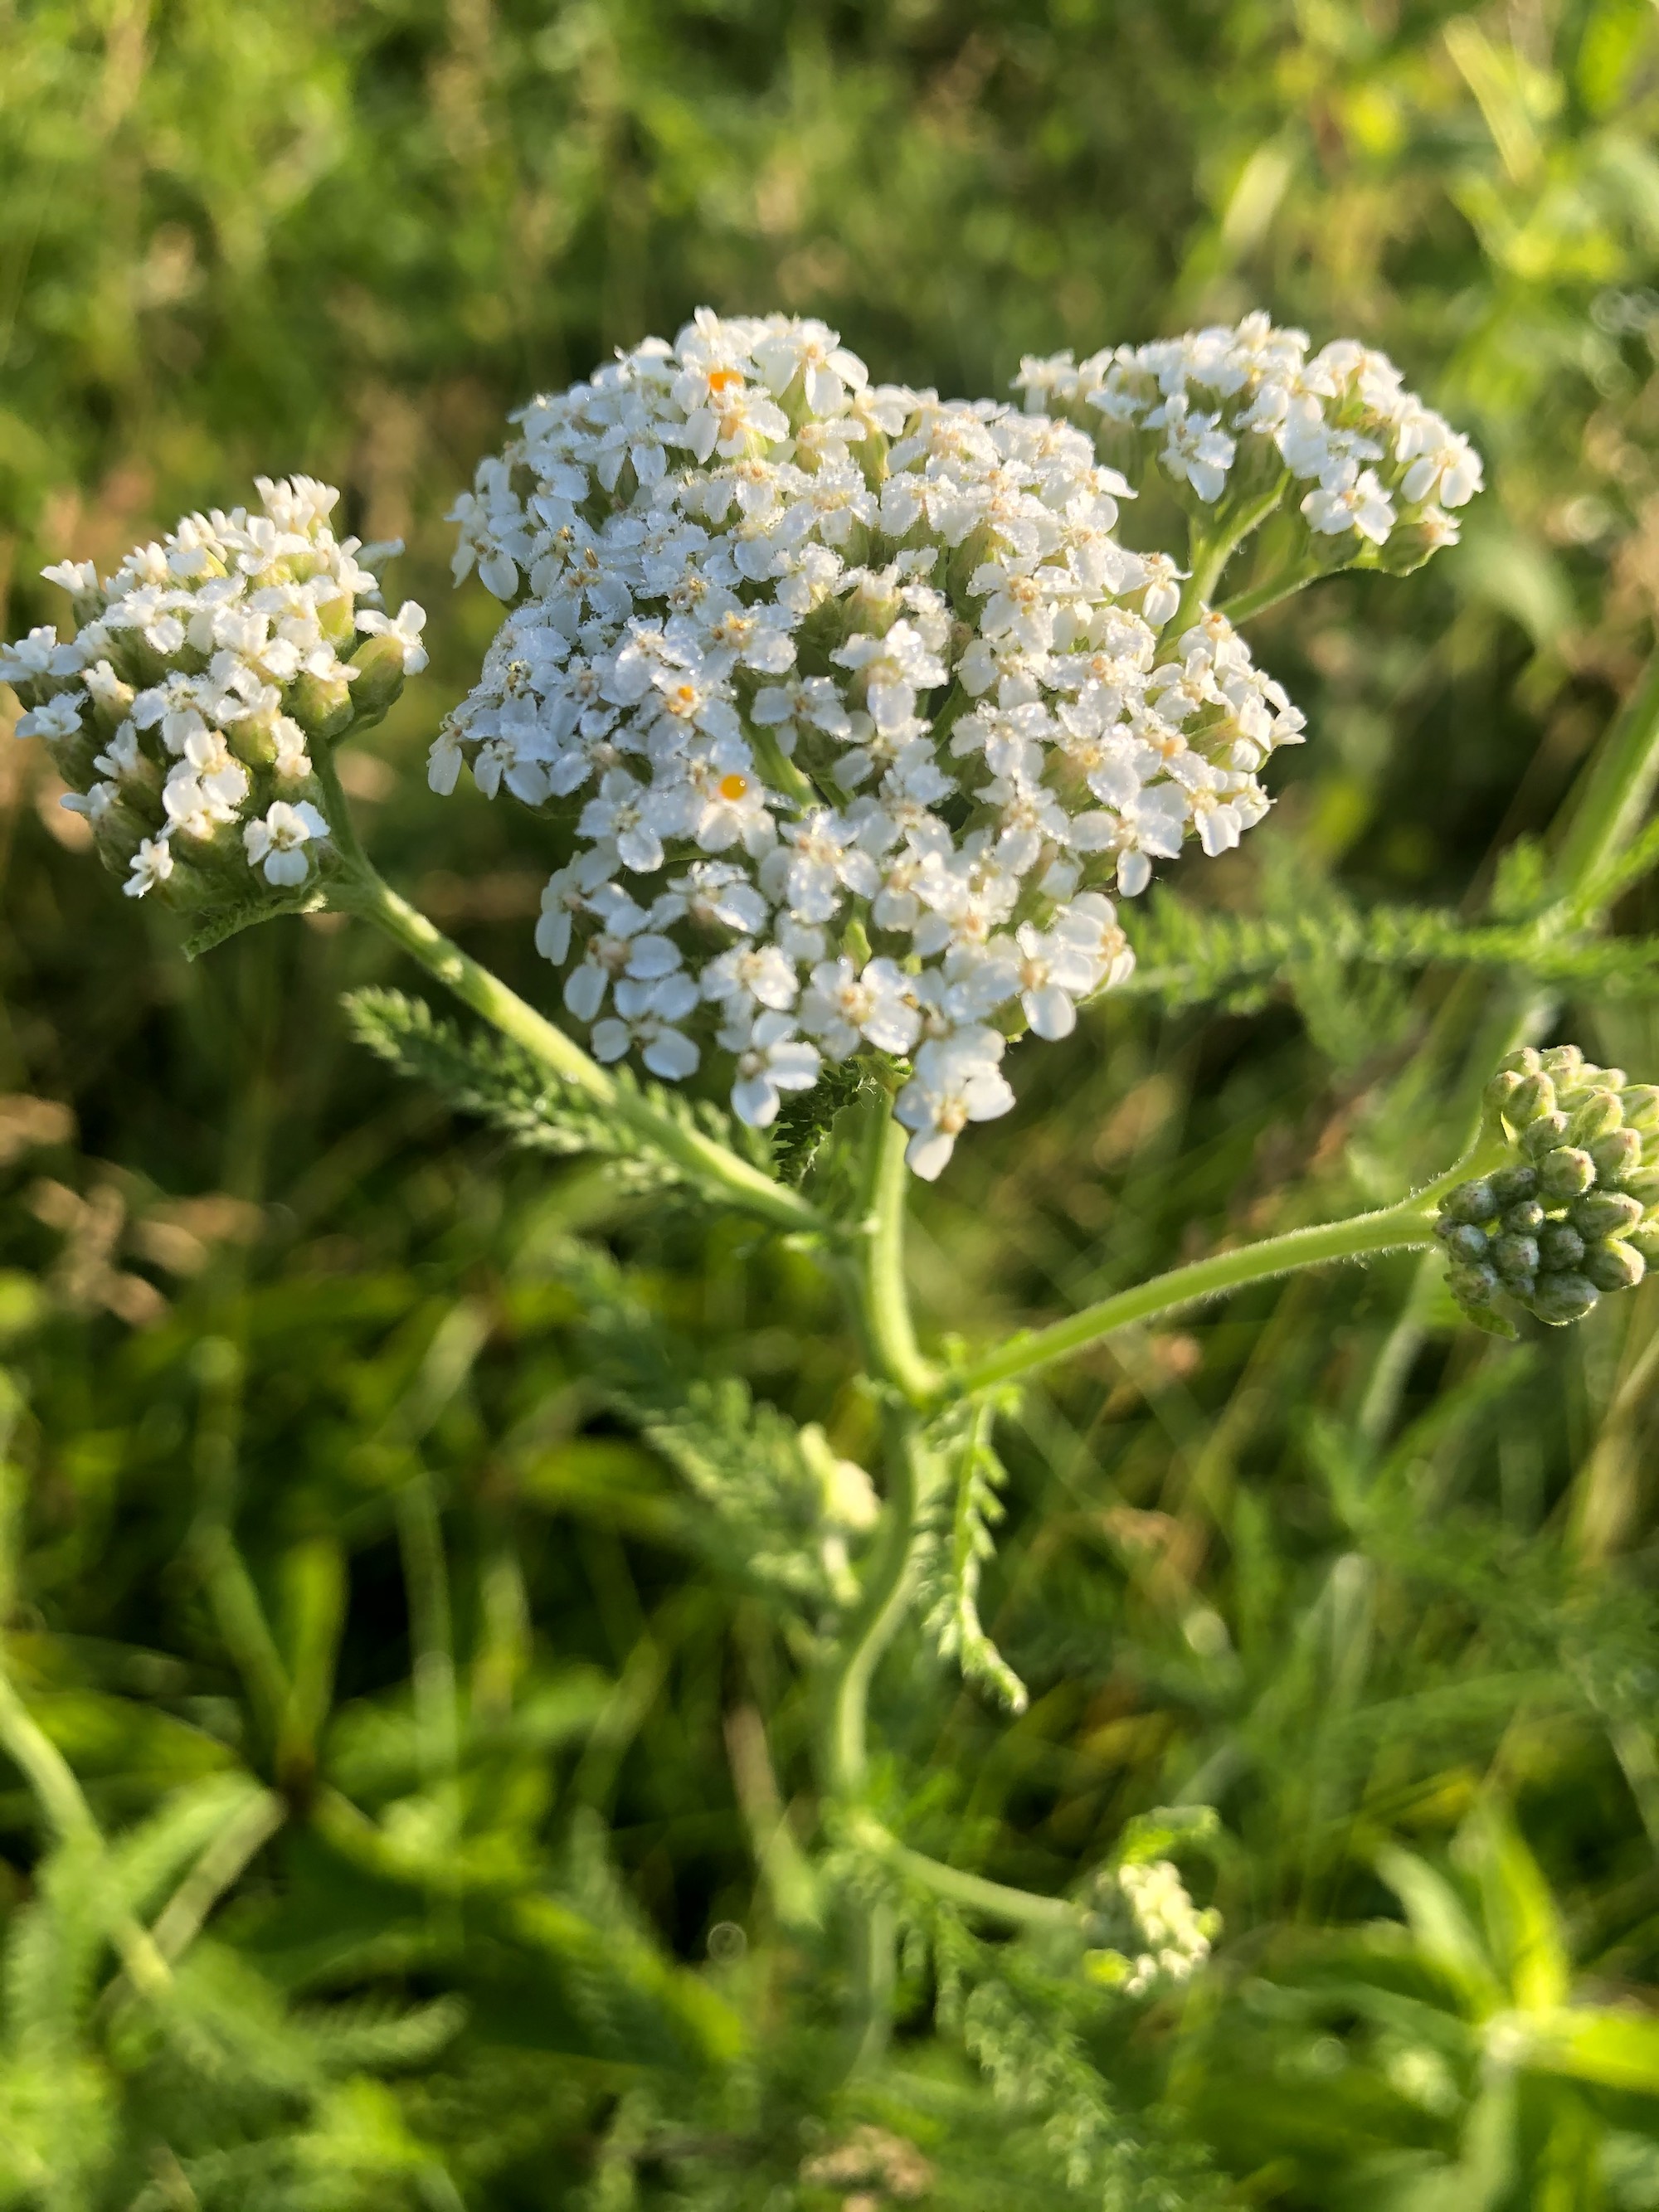 Common Yarrow on shore of Marion Dunn Pond on June 18, 2020.